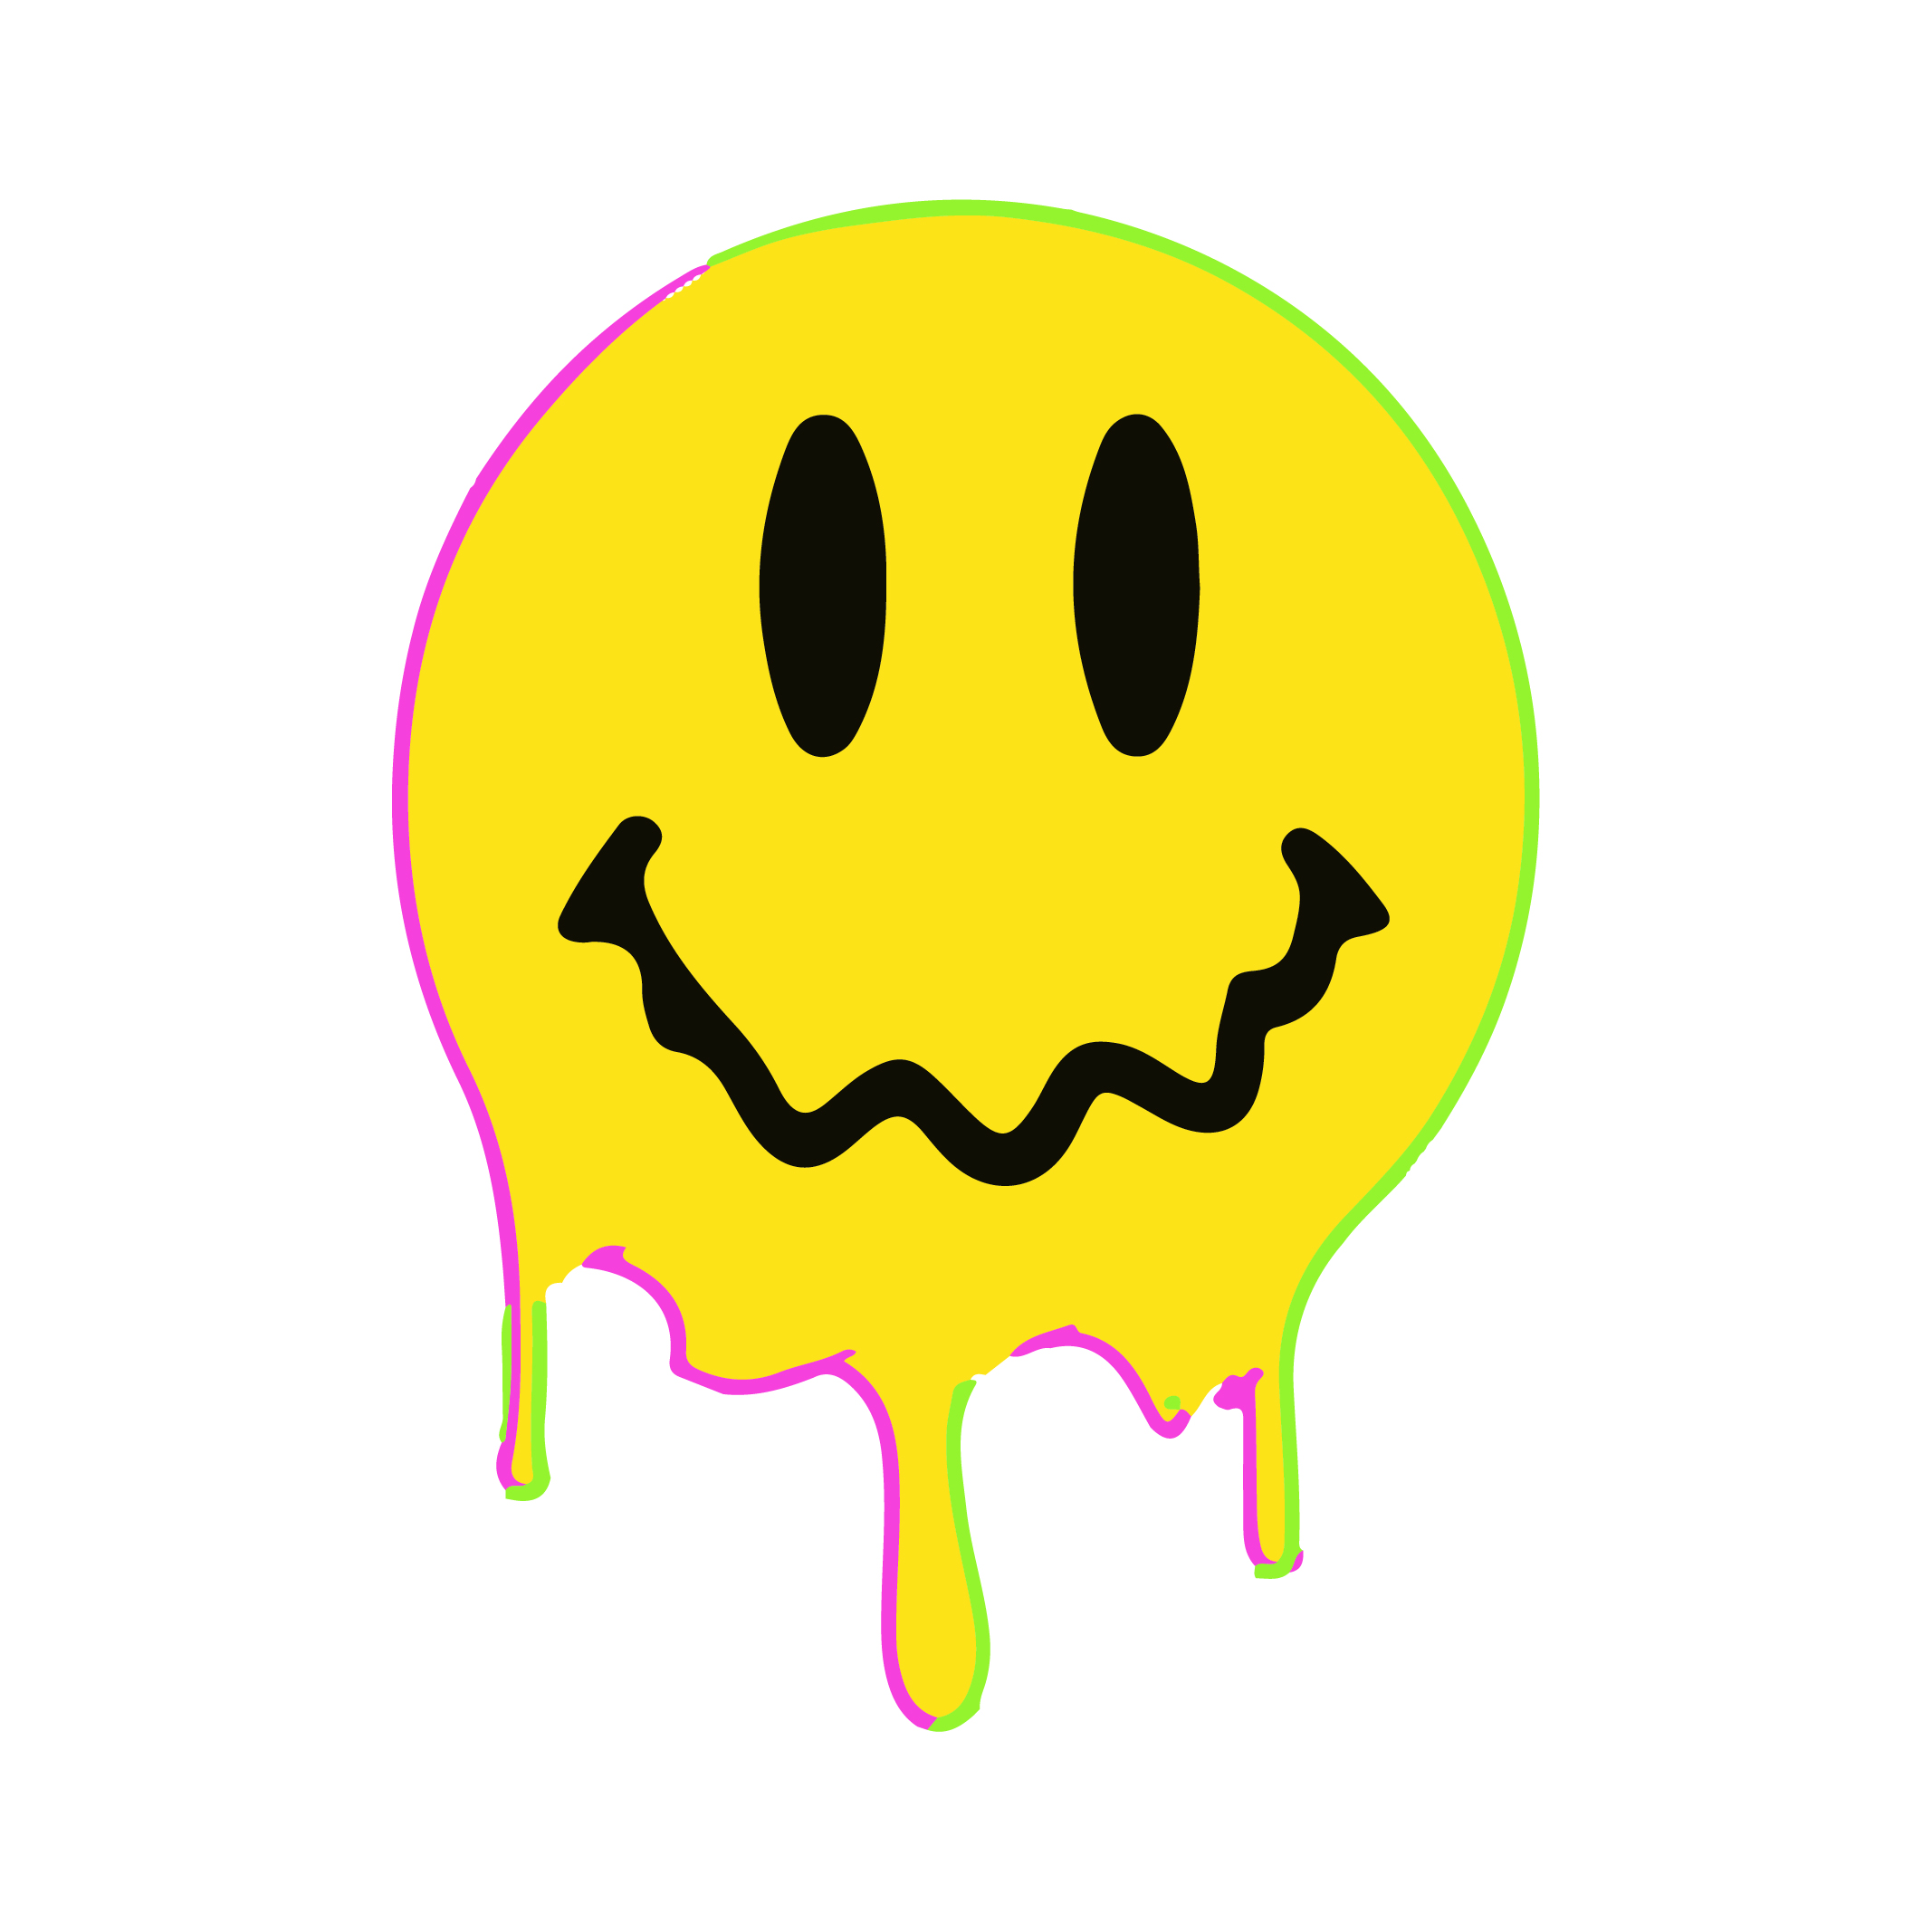 FREE Smiley SVG - Image Download | Template.net